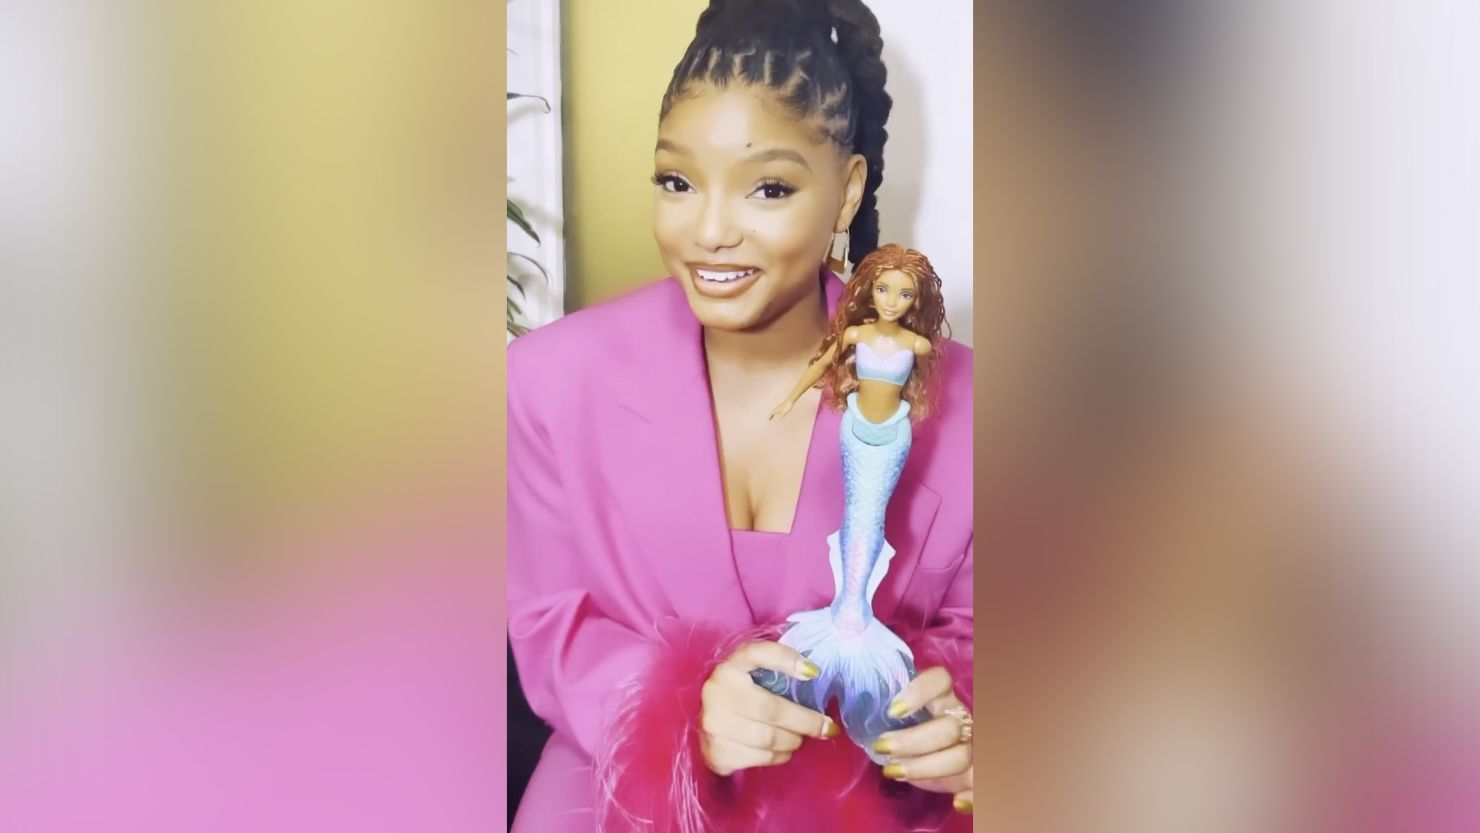 The new "Little Mermaid" doll was revealed last week, a replica of actor Halle Bailey who plays Ariel in the forthcoming Disney film. 